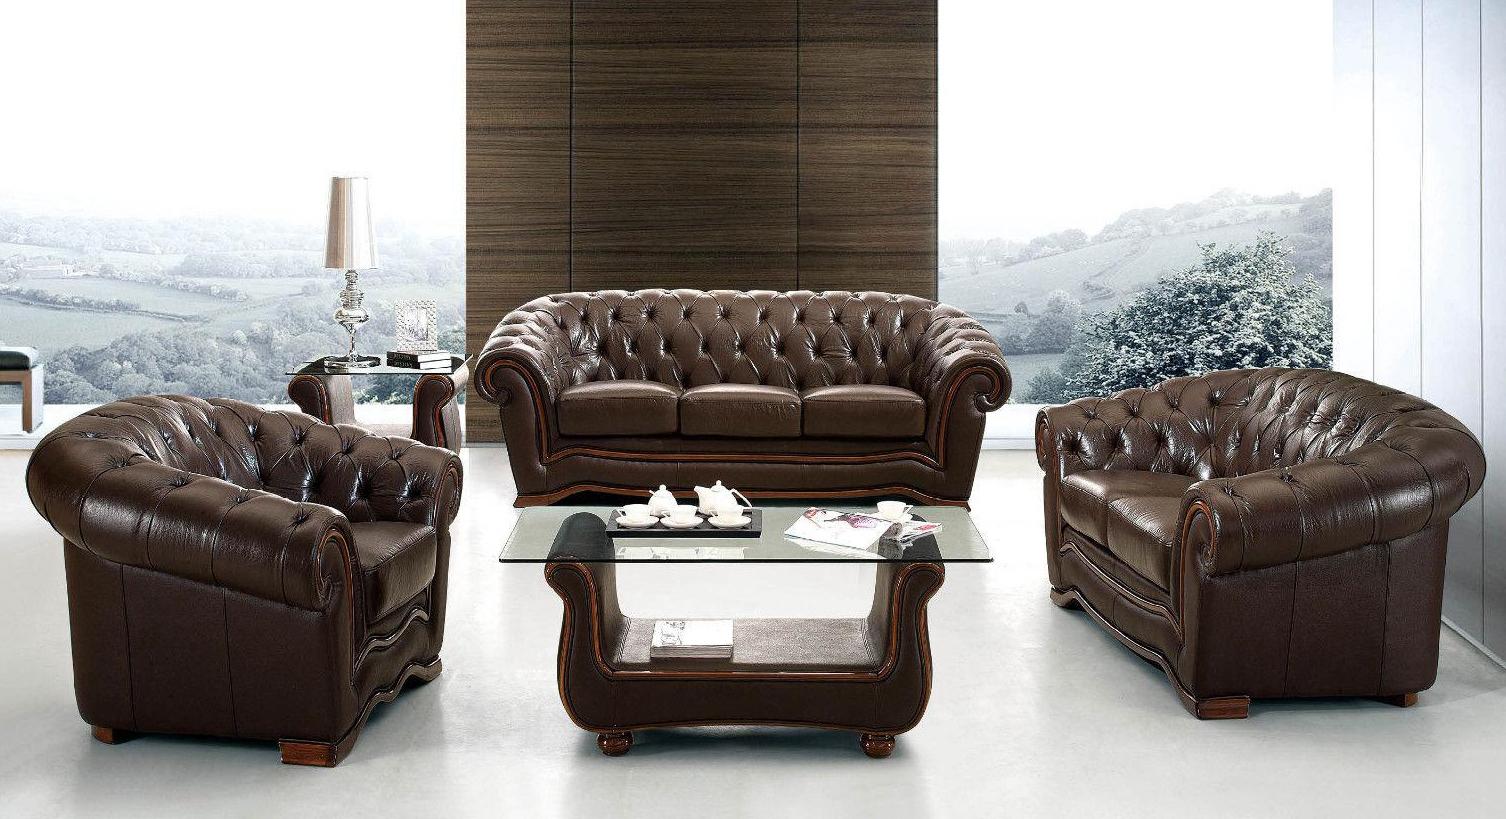 Contemporary Sofa Loveseat and Chair Set LH2080-BR-S/L/C LH2080-BR-Sofa Set-3 in Dark Brown Leather